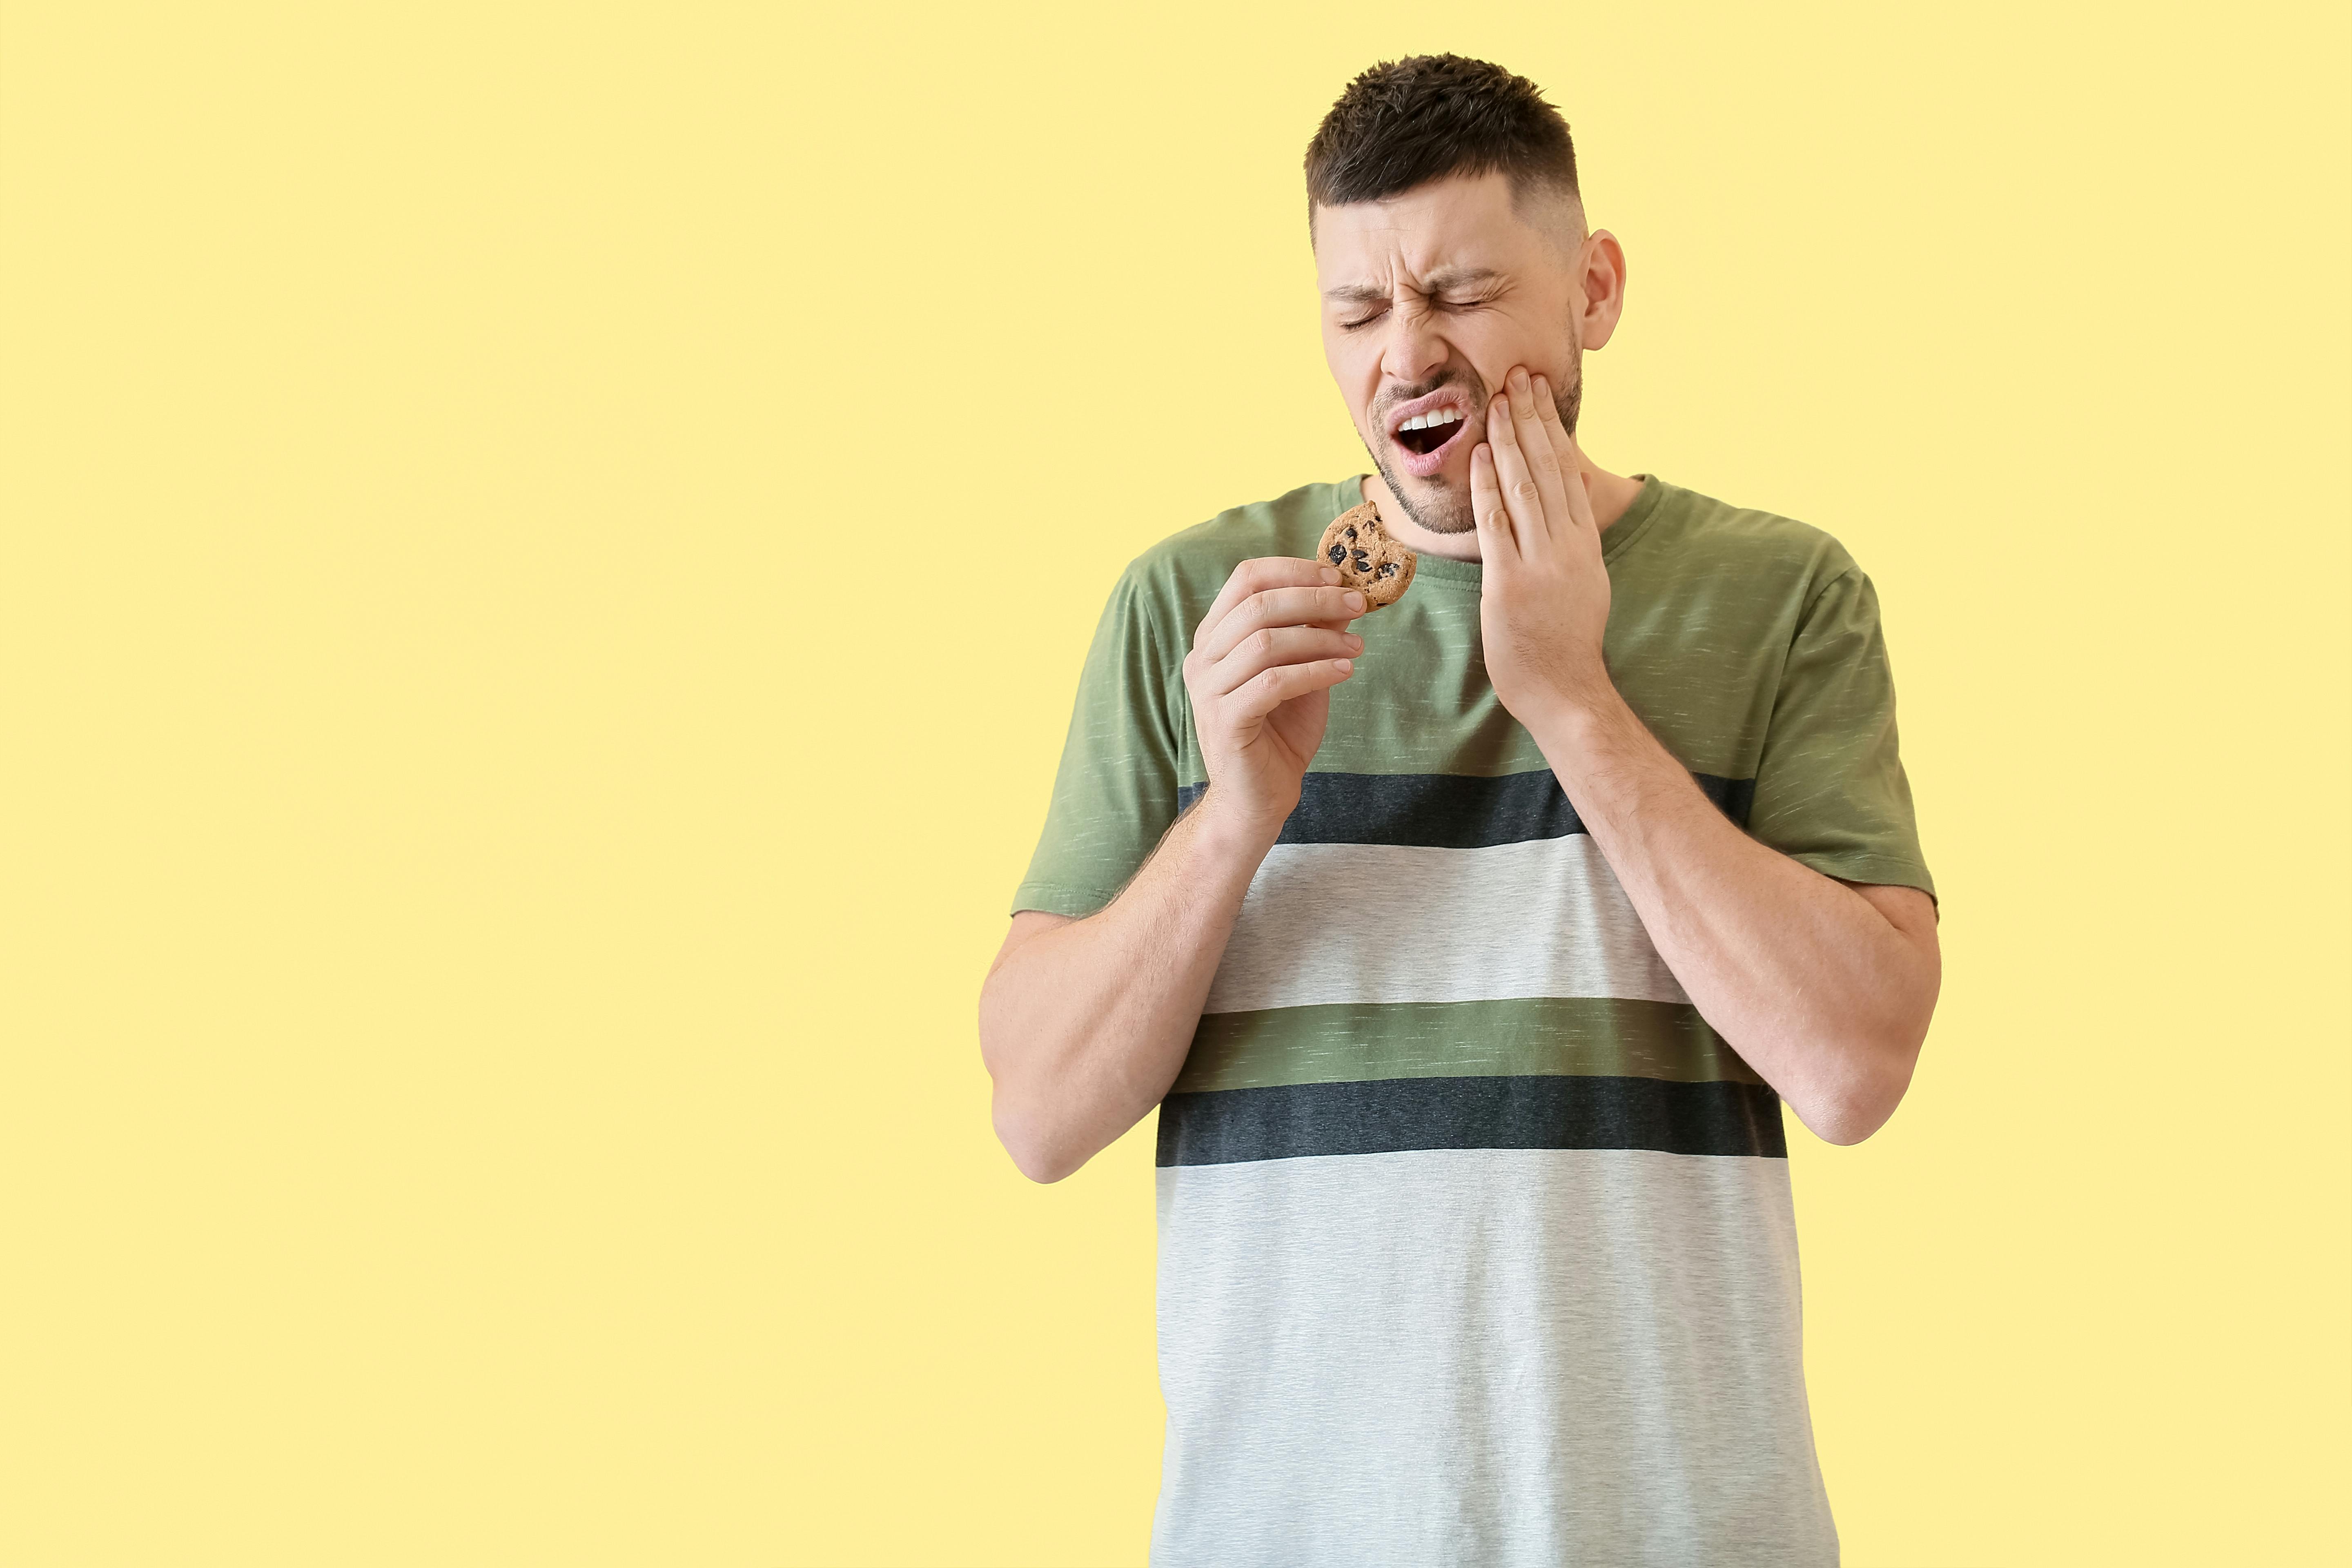 Man experiences tooth pain after biting into cookie